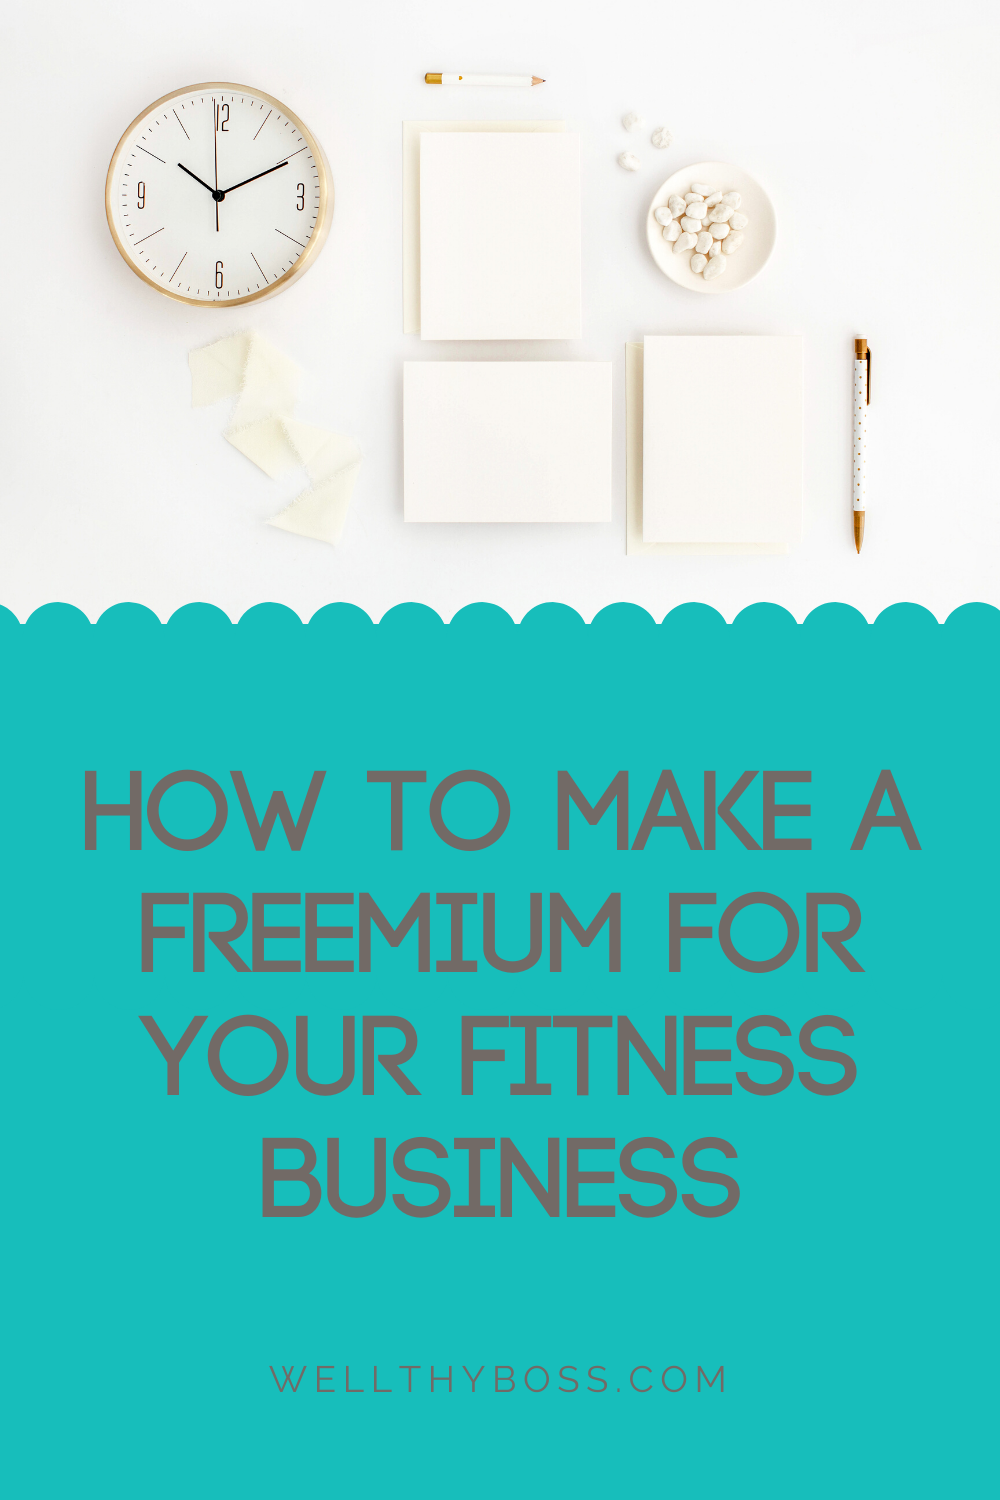 How to Make a Freemium for your Fitness Business